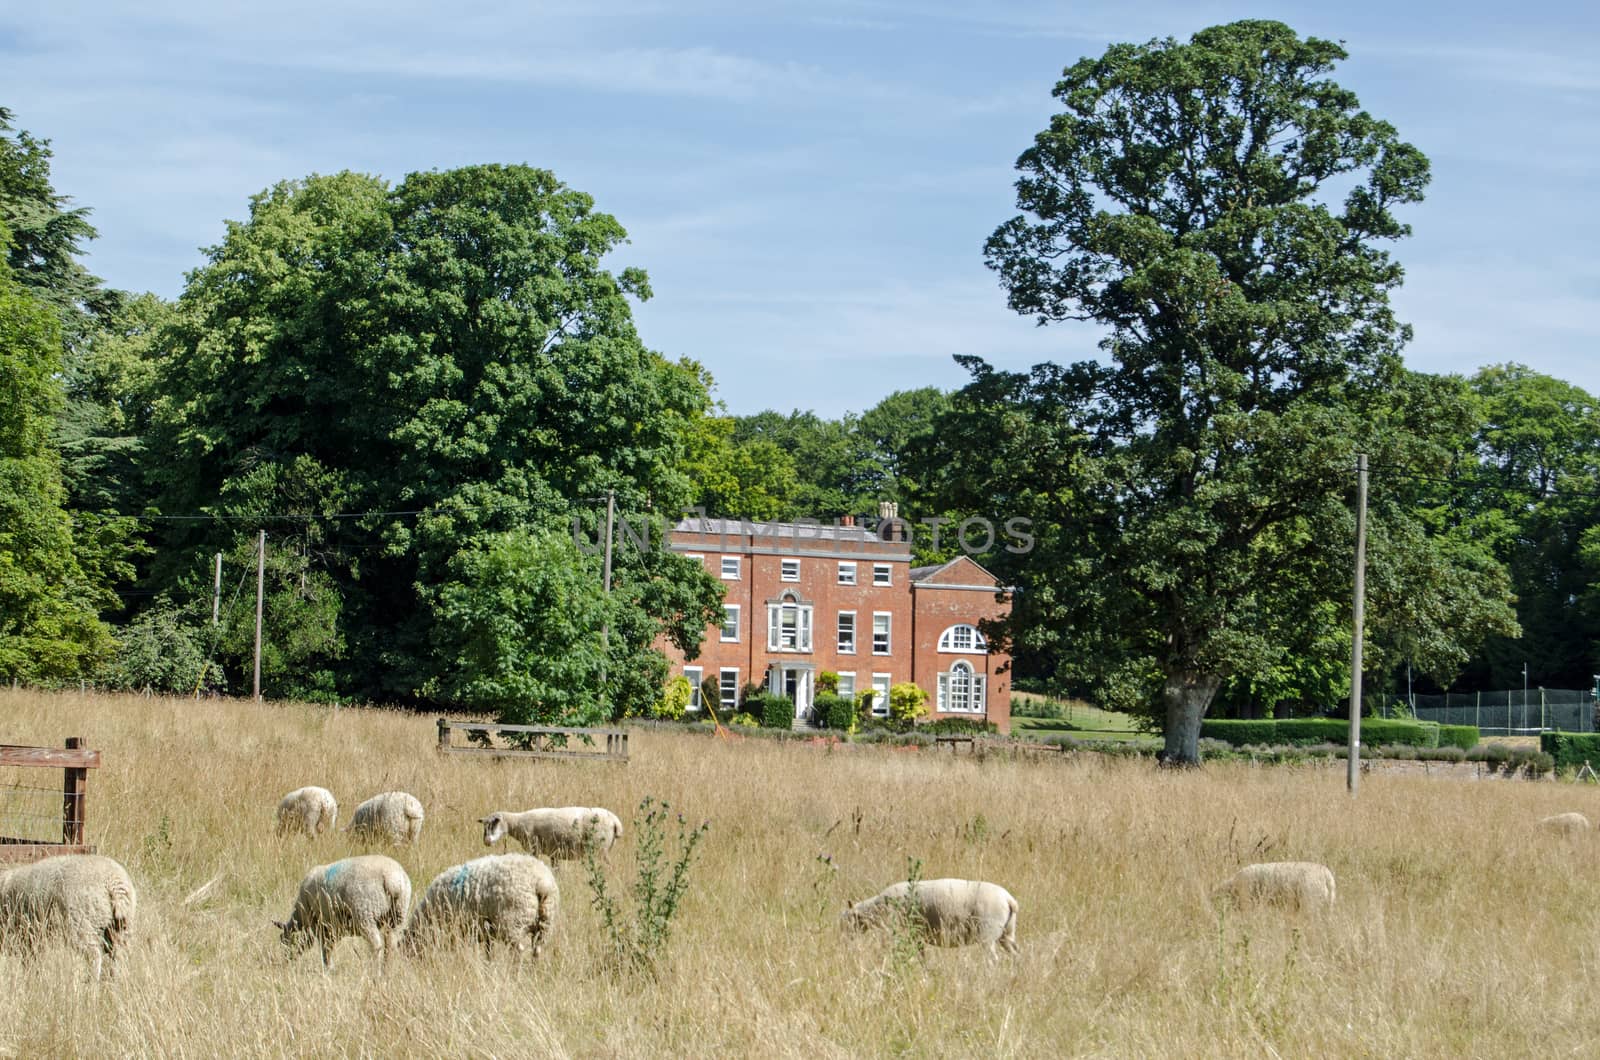 Sheep grazing in the long grass outside the historic Worting House in Basingstoke, Hampshire.  The novelist Jane Austen lived nearby and often visited. 